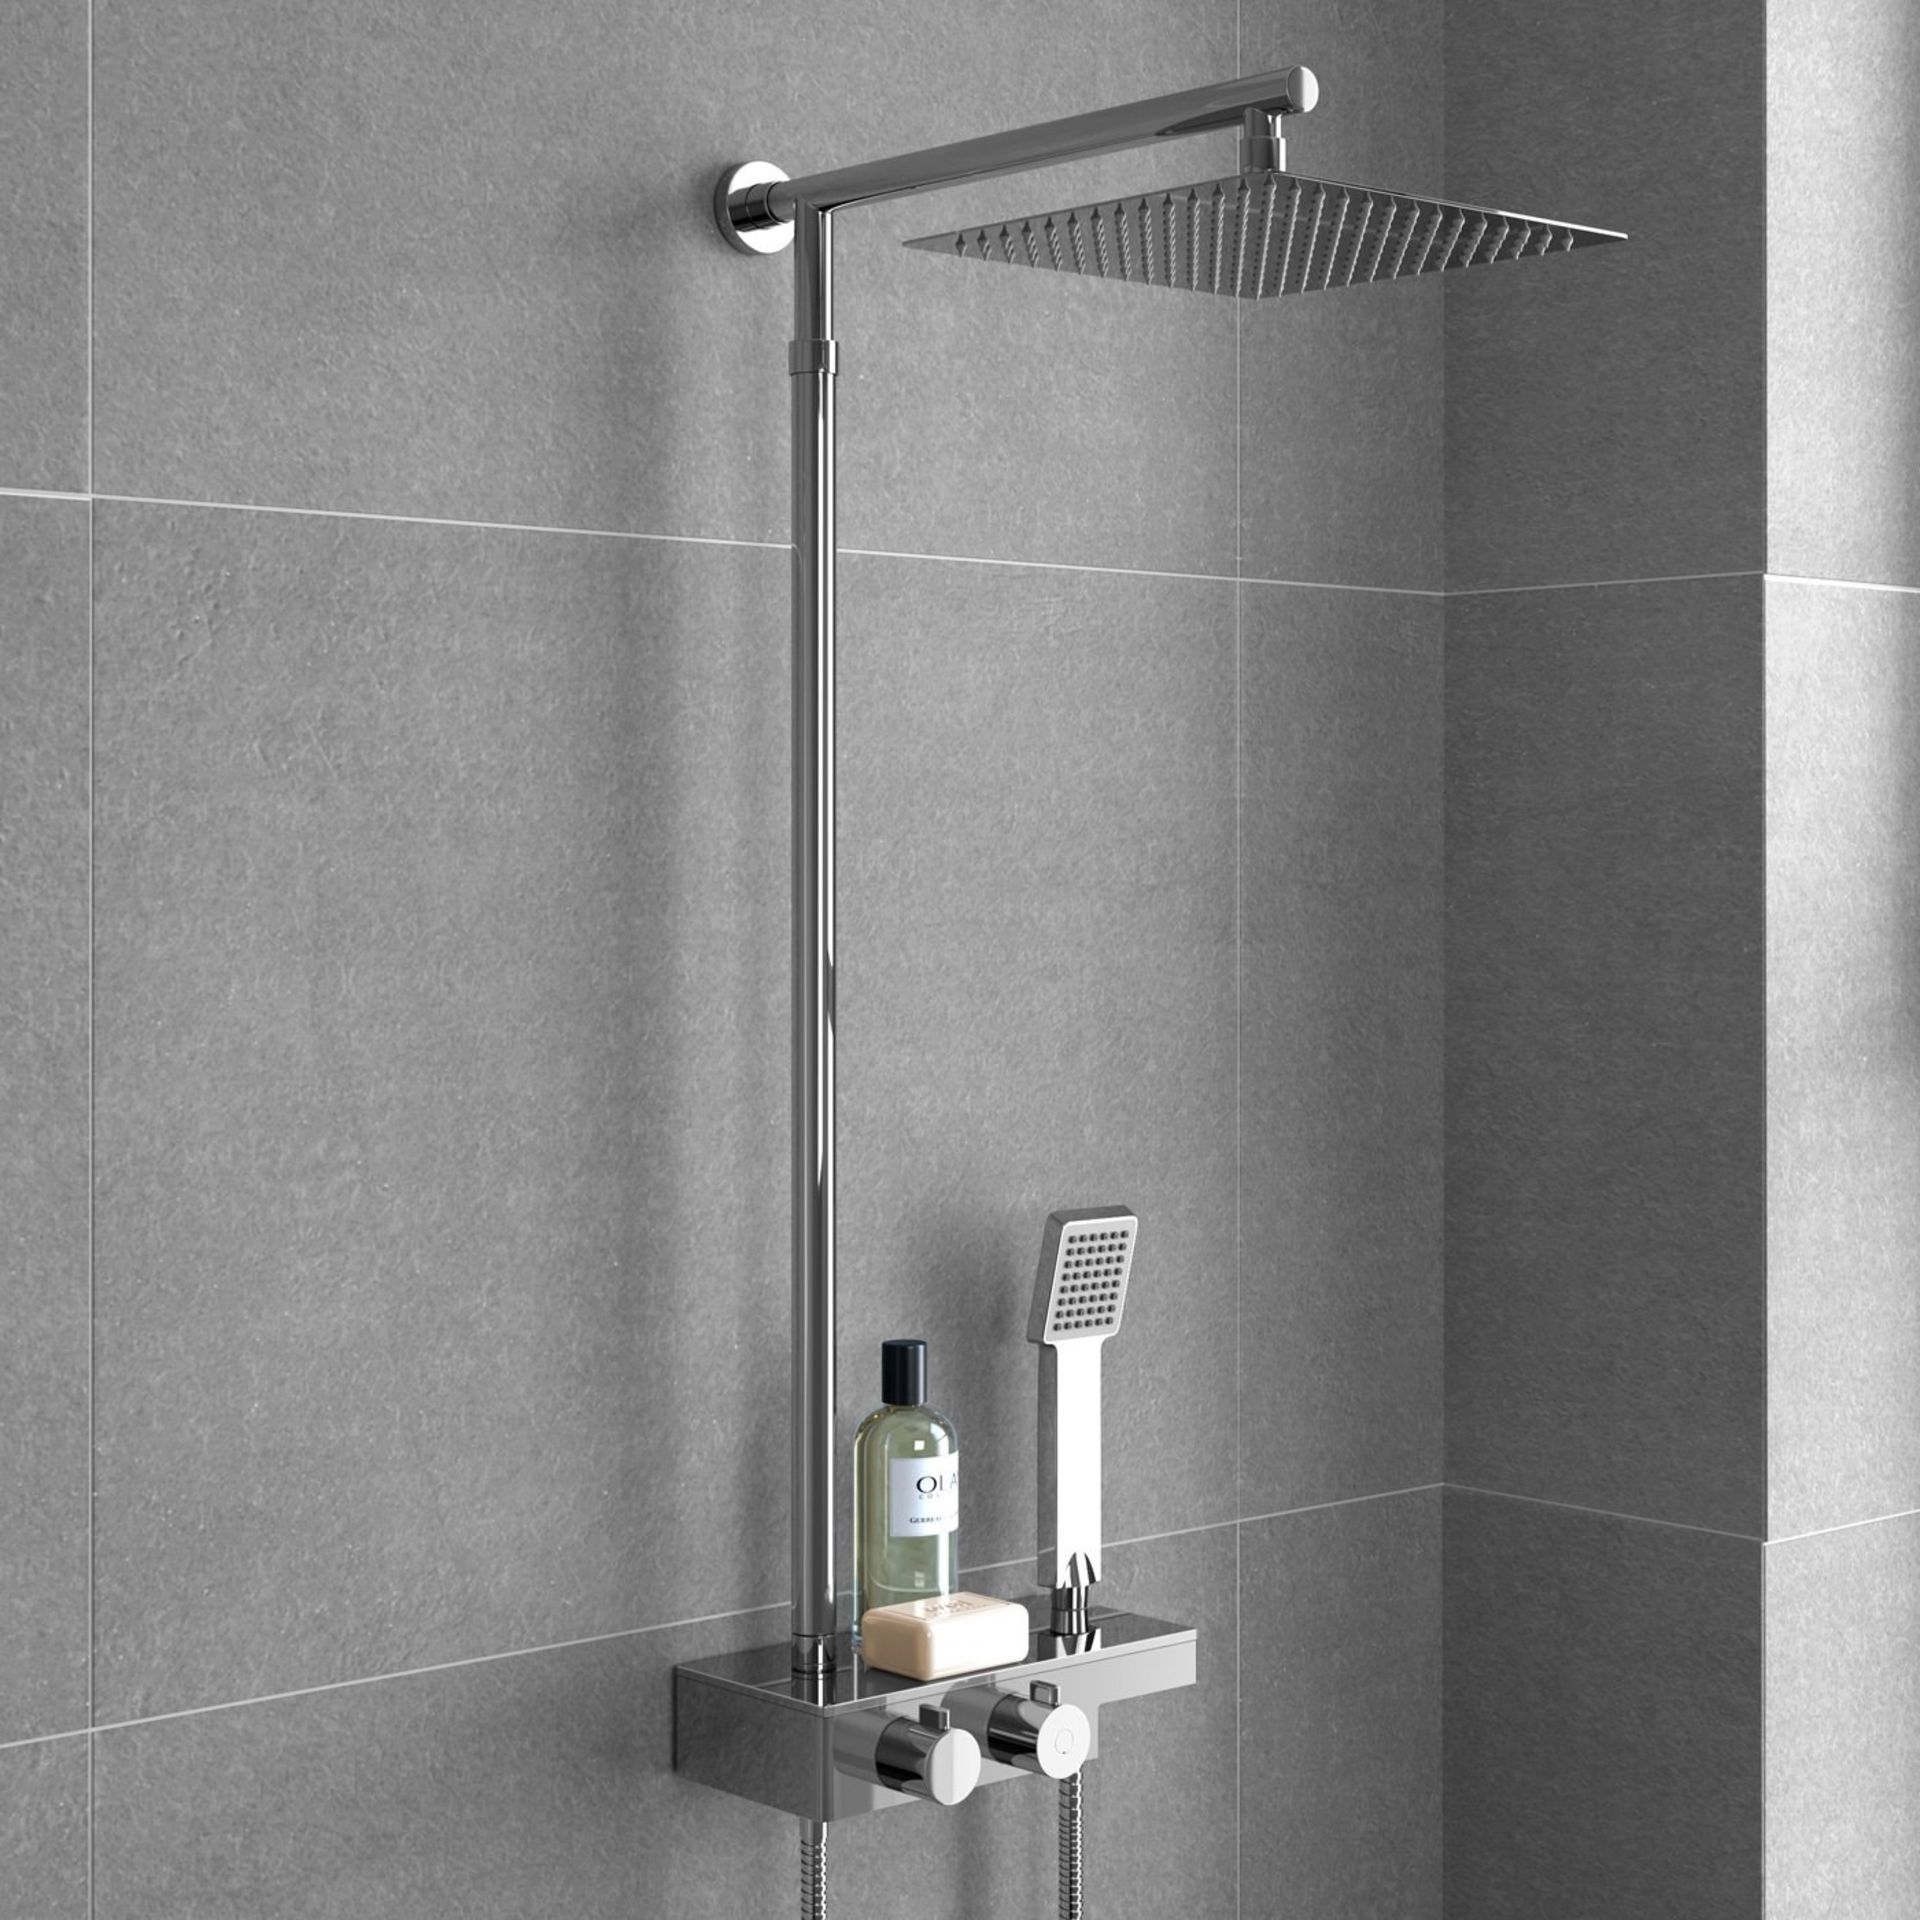 NEW (Z204) Square Thermostatic Bar Mixer Shower Set Valve with Shelf 10" Head + Handset. Solid...